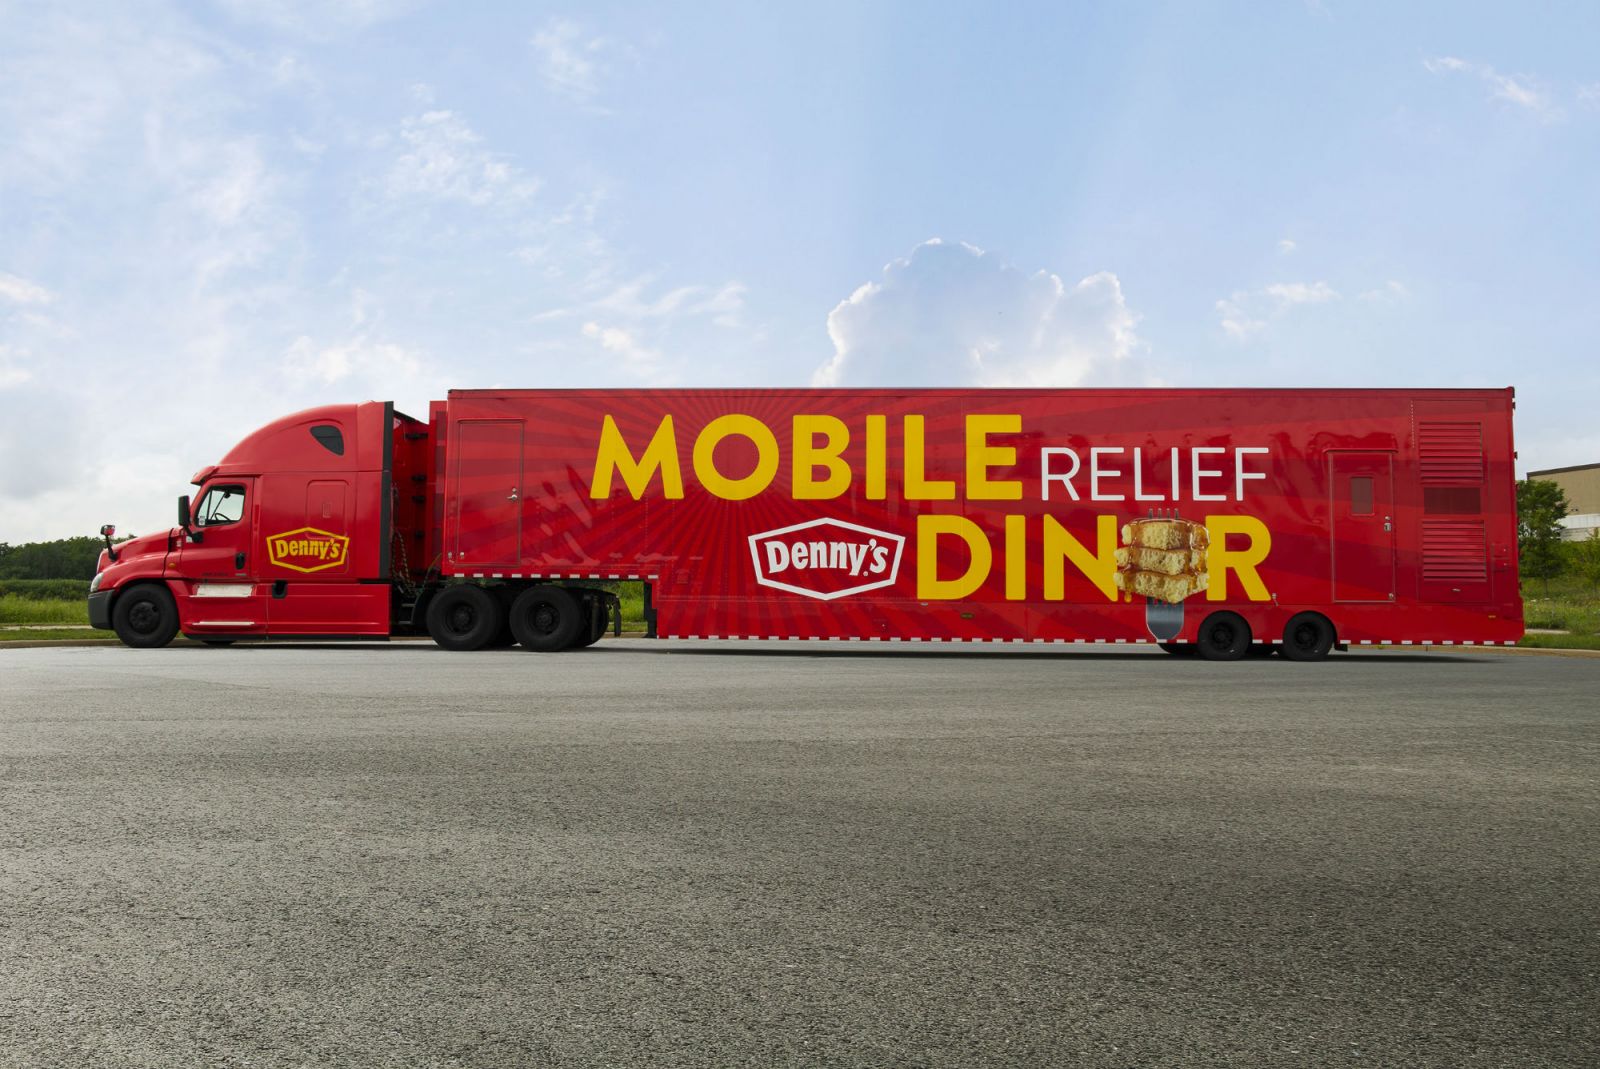 Denny's Mobile Relief Diner is responding to Hurricane Florence. (Photo/Provided)